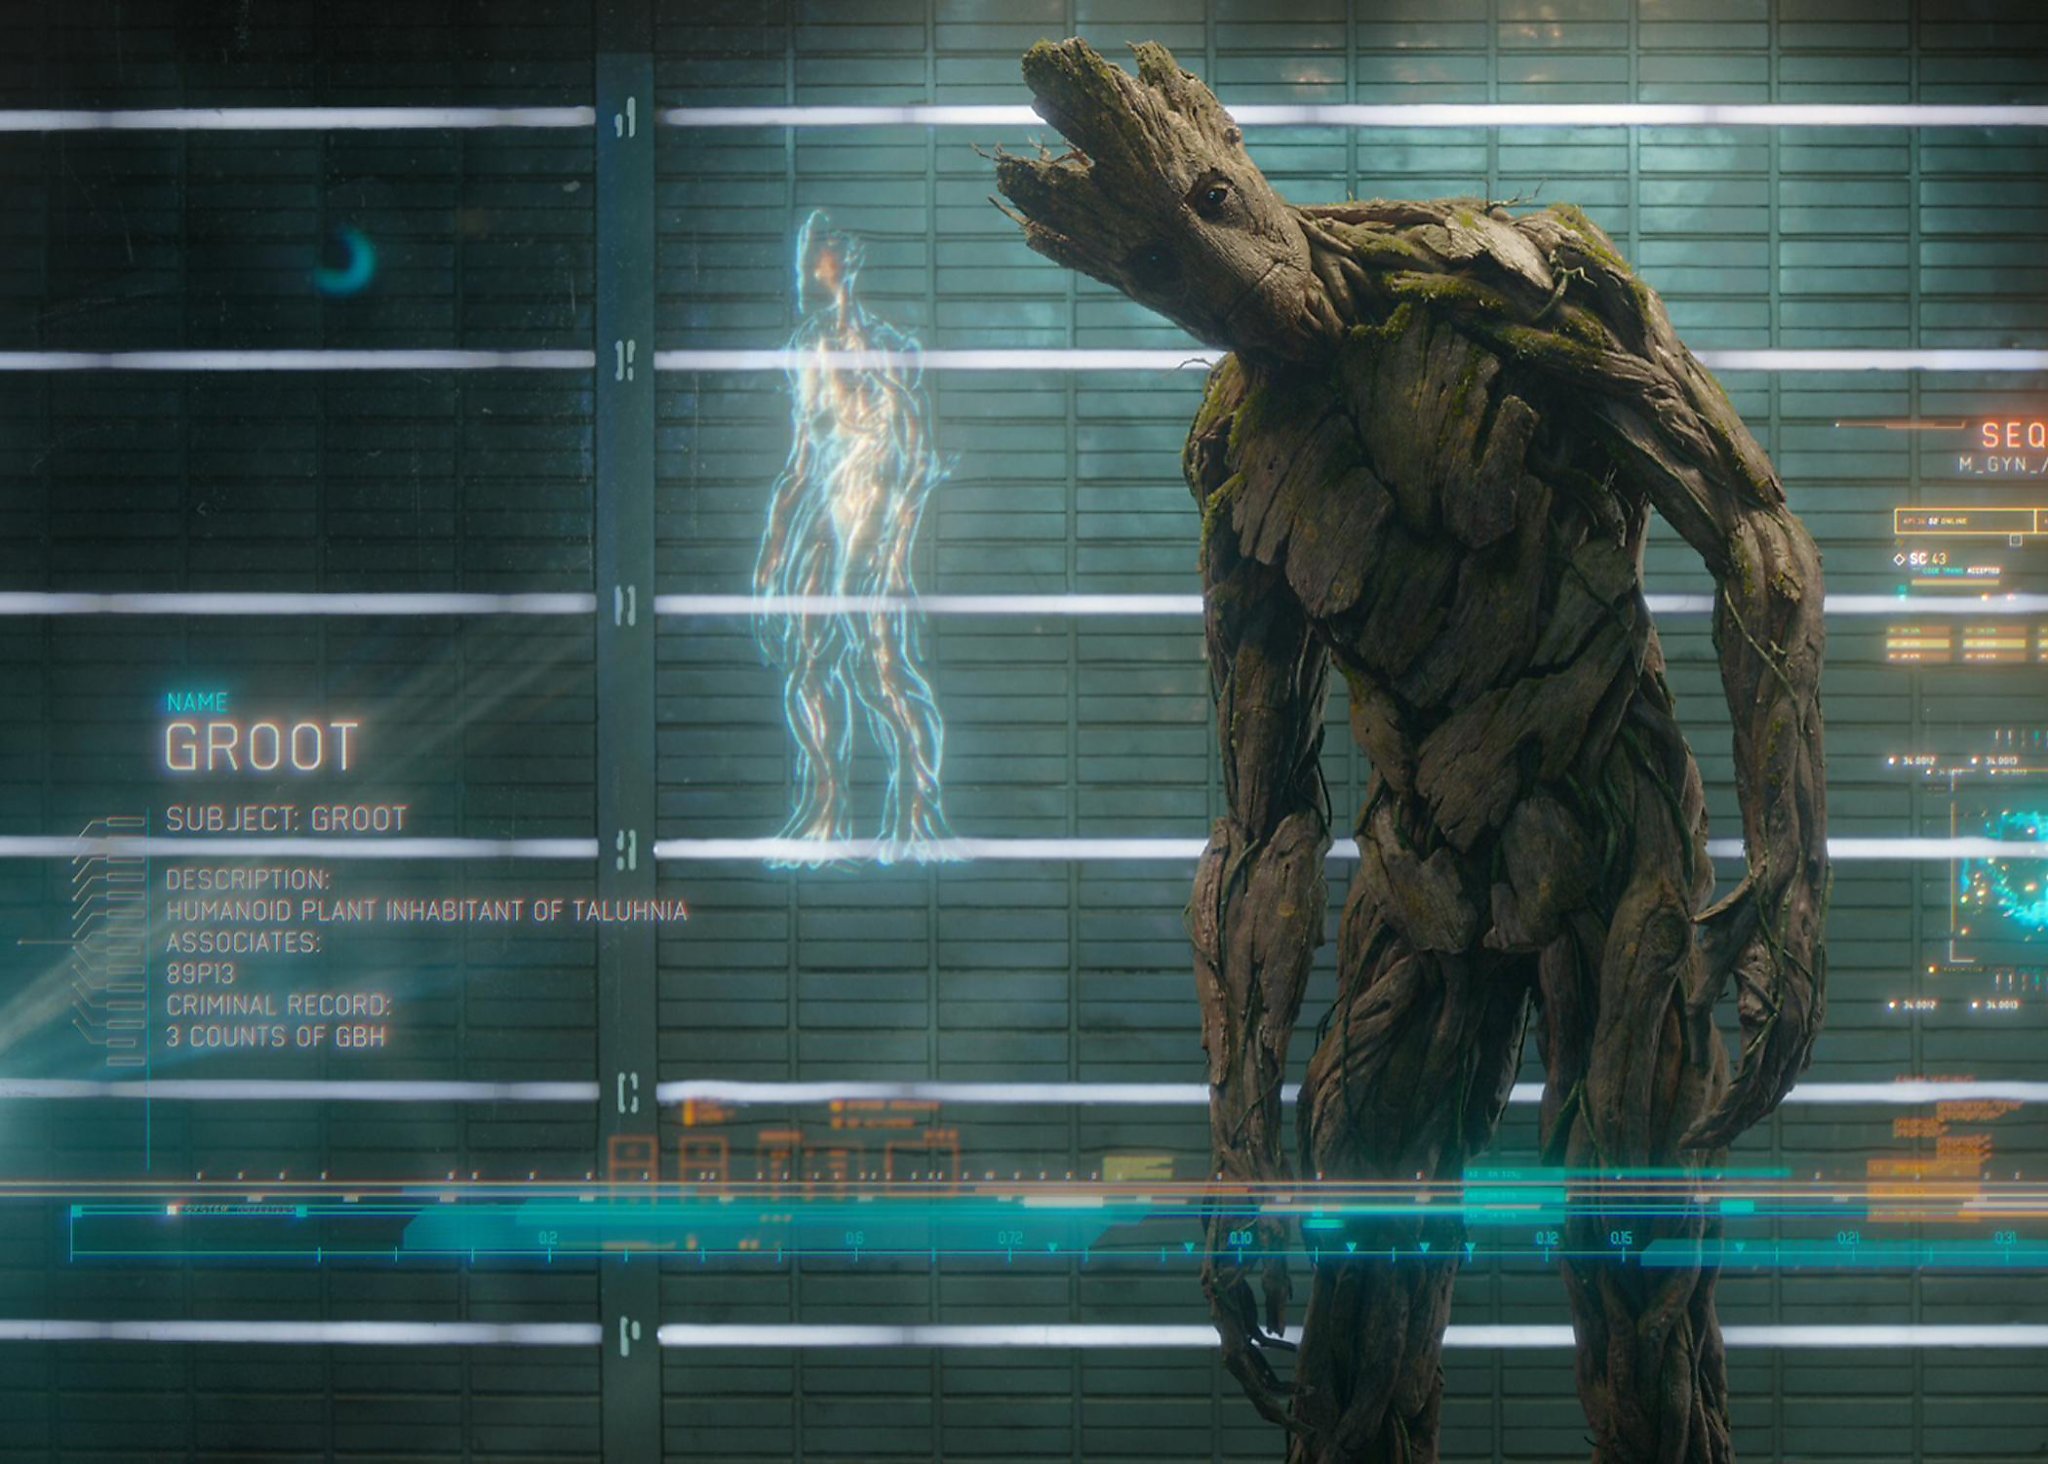 Texas student's 'I am Groot' cover letter and resume goes viral - Houston Chronicle